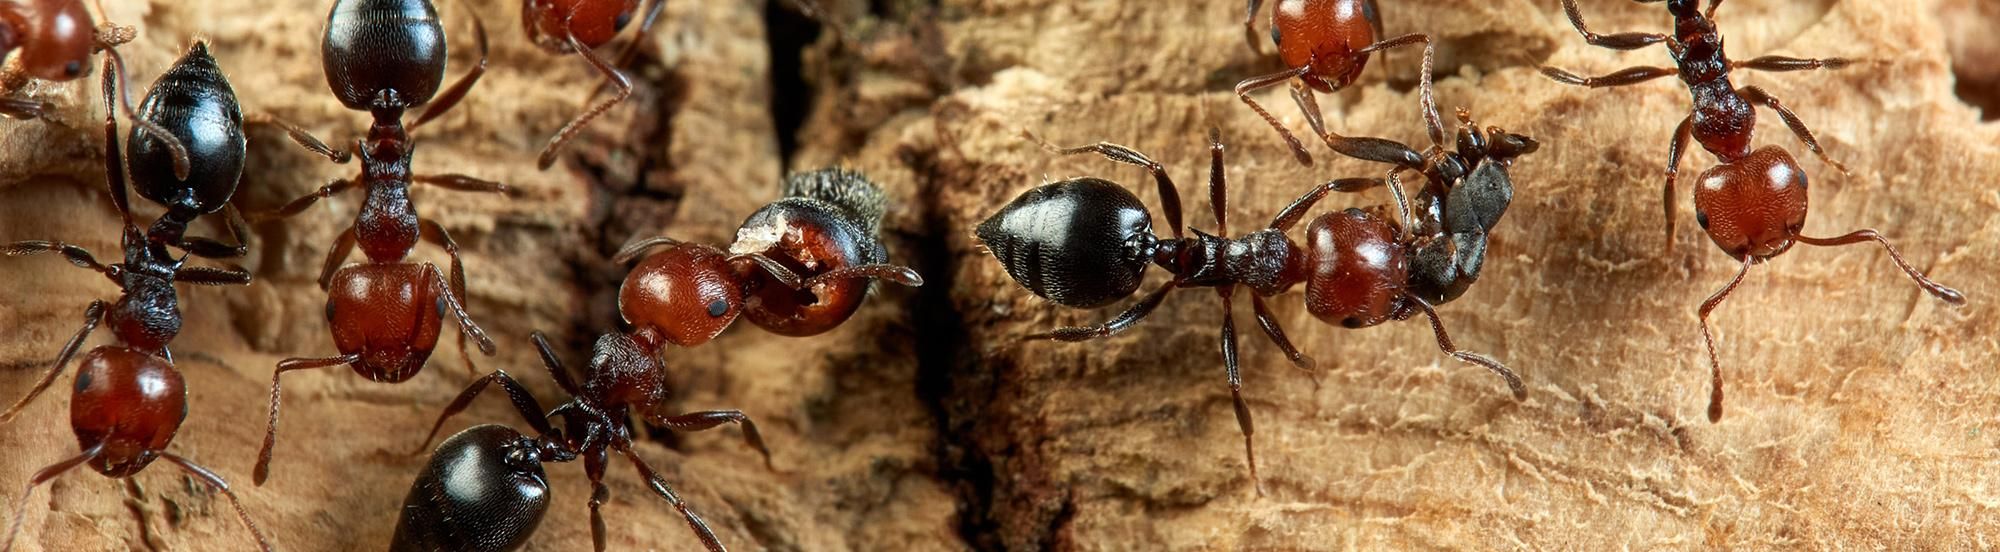 acrobat ants foraging for food